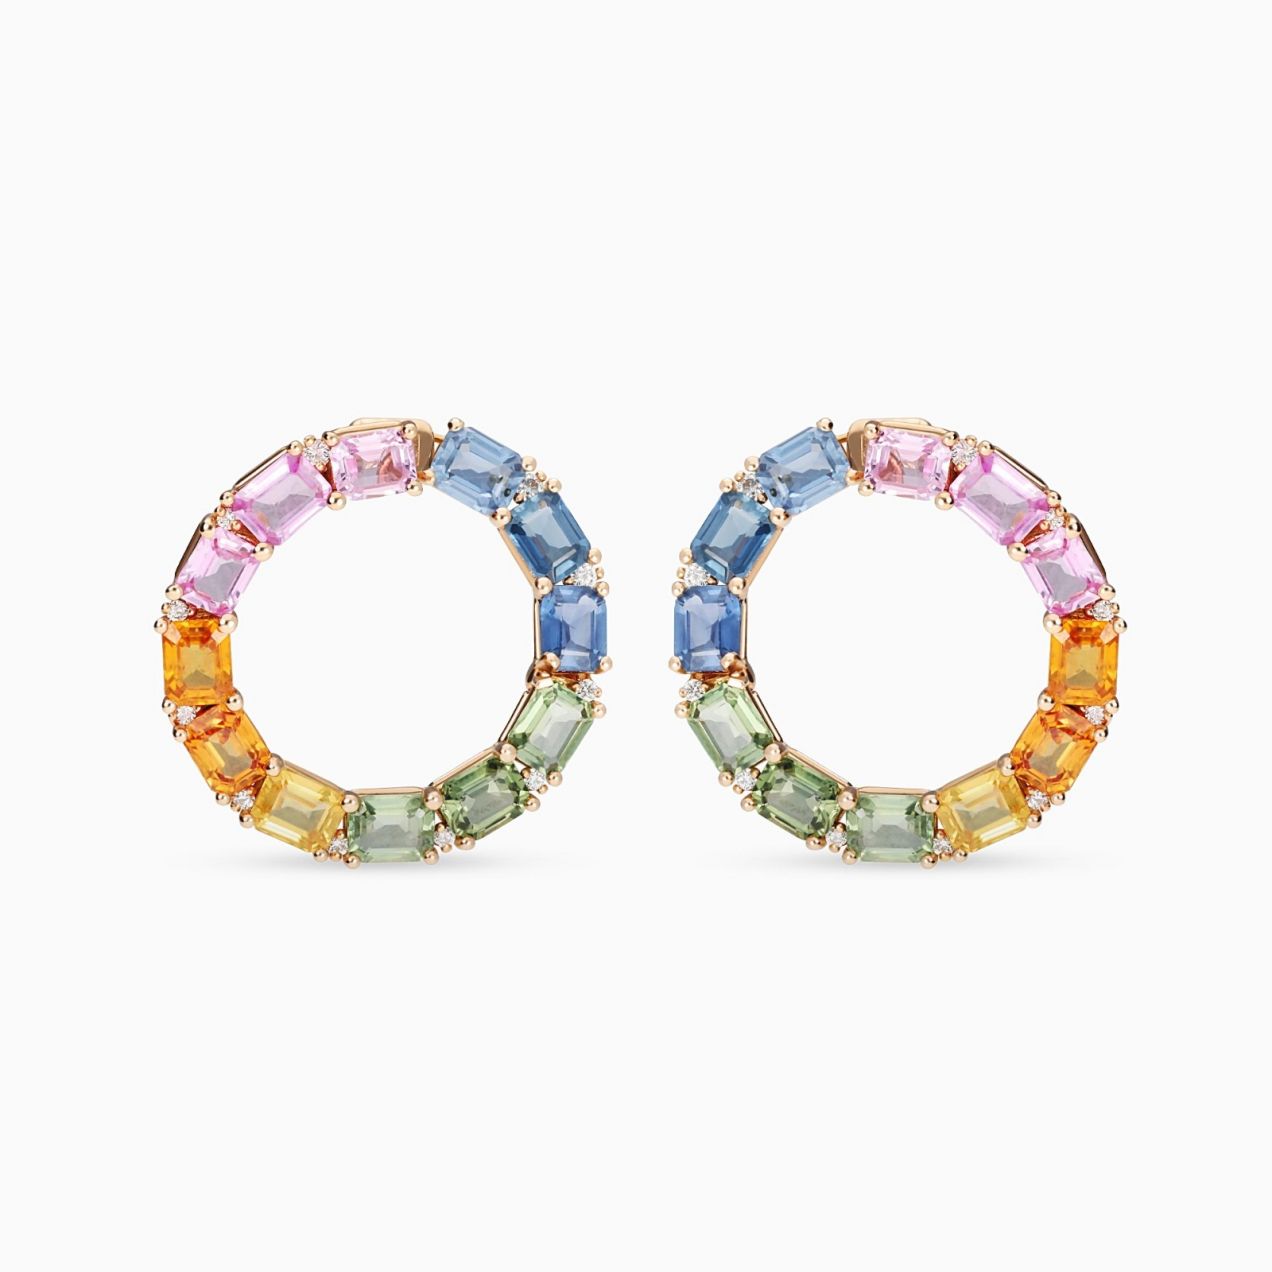 Rose gold hoop earrings with octagonal-cut multicoloured sapphires and mini diamonds